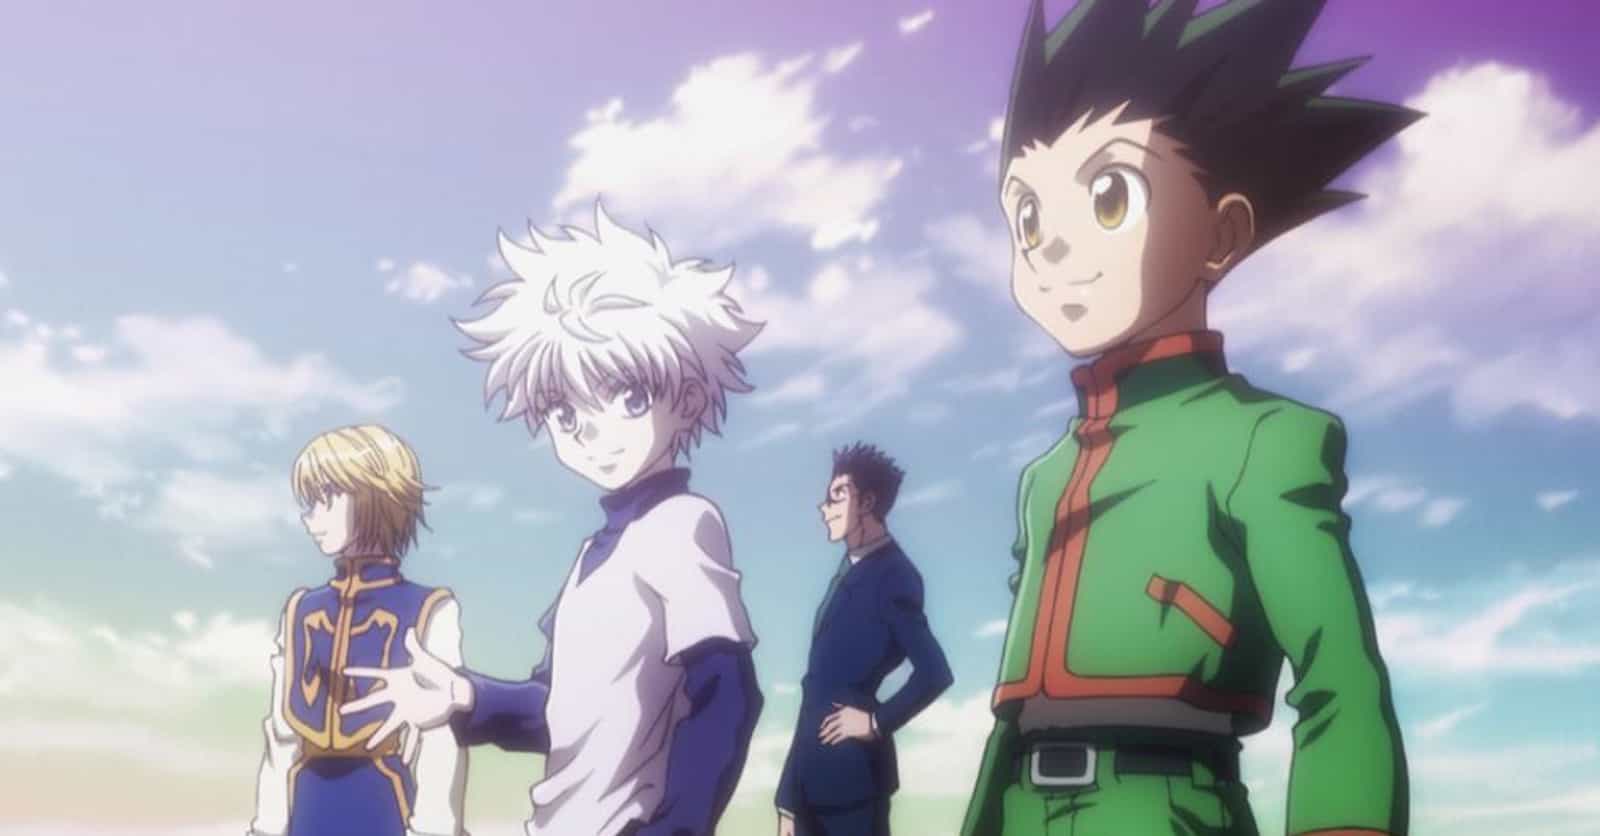 15 Unanswered Questions We Have About ‘Hunter x Hunter’